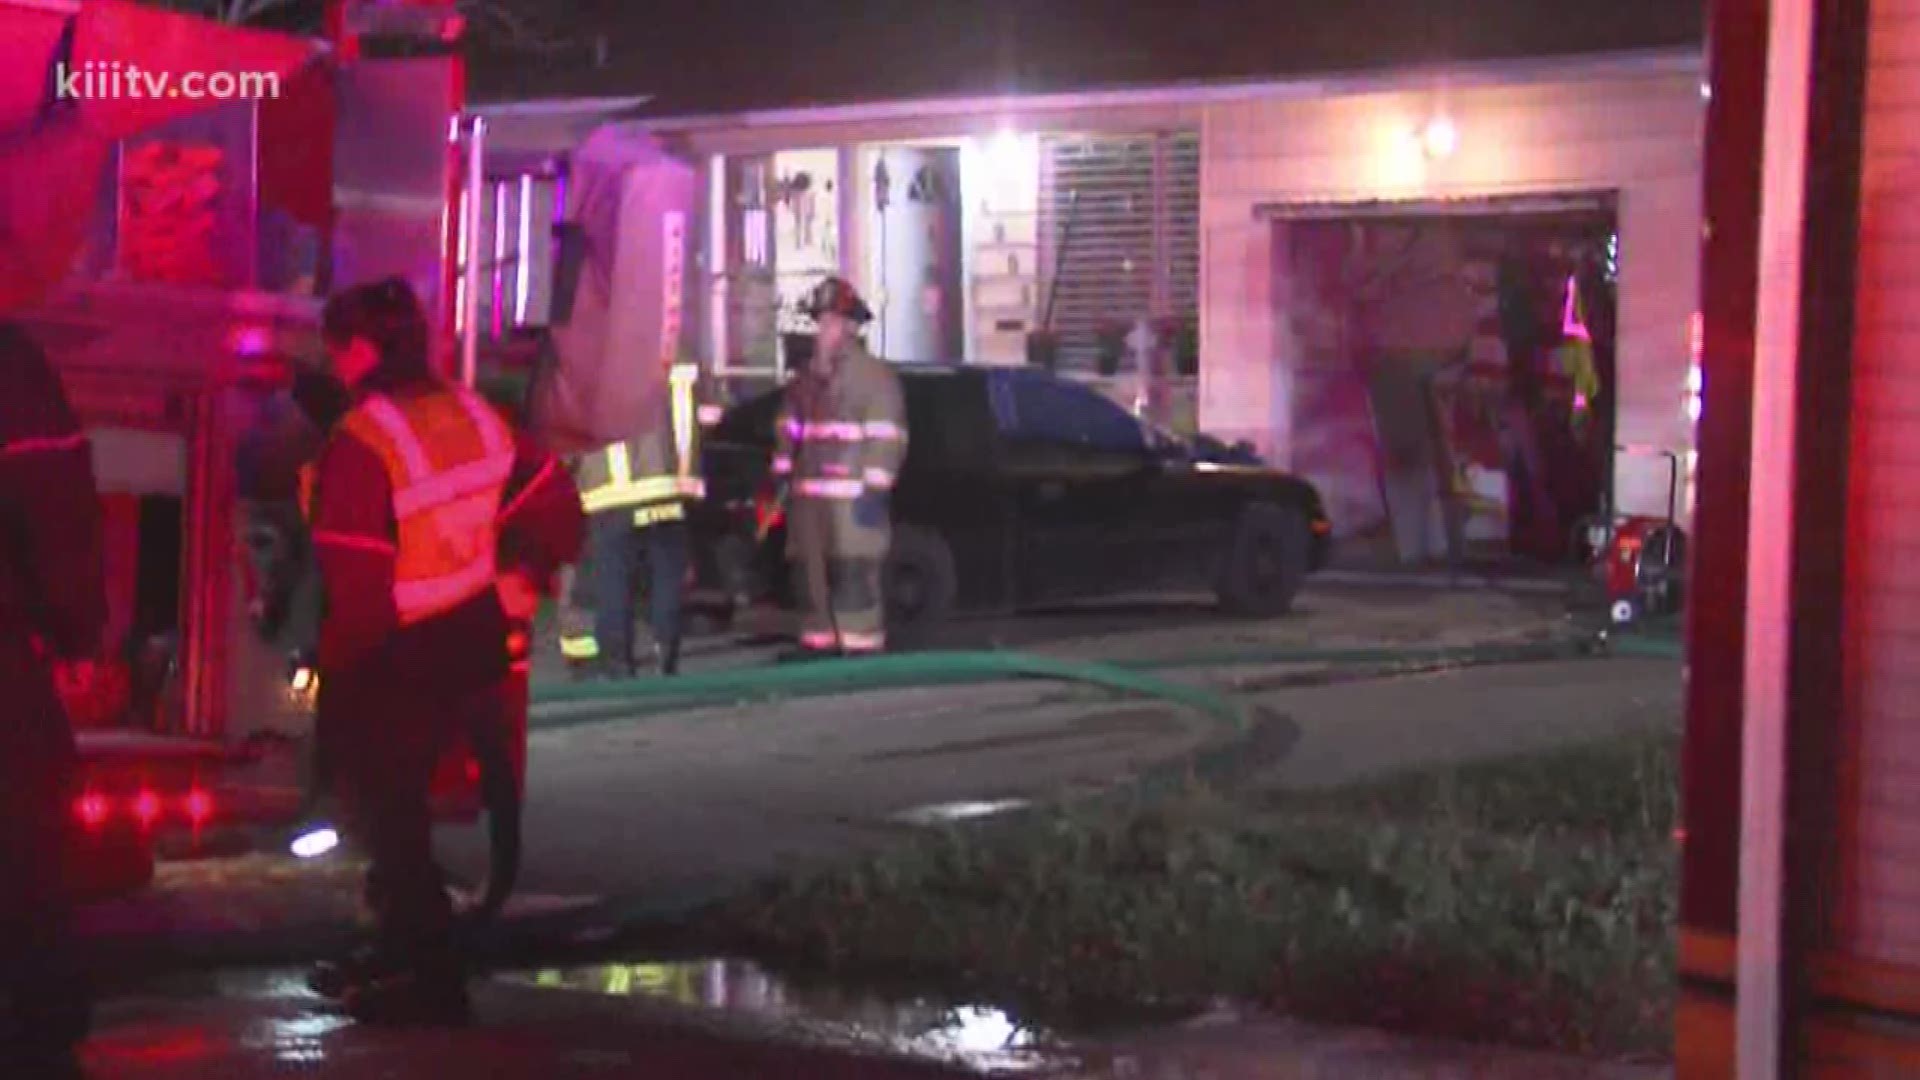 Corpus Christi firefighters are investigating an early morning fire that gave neighbors quite a scare Monday.